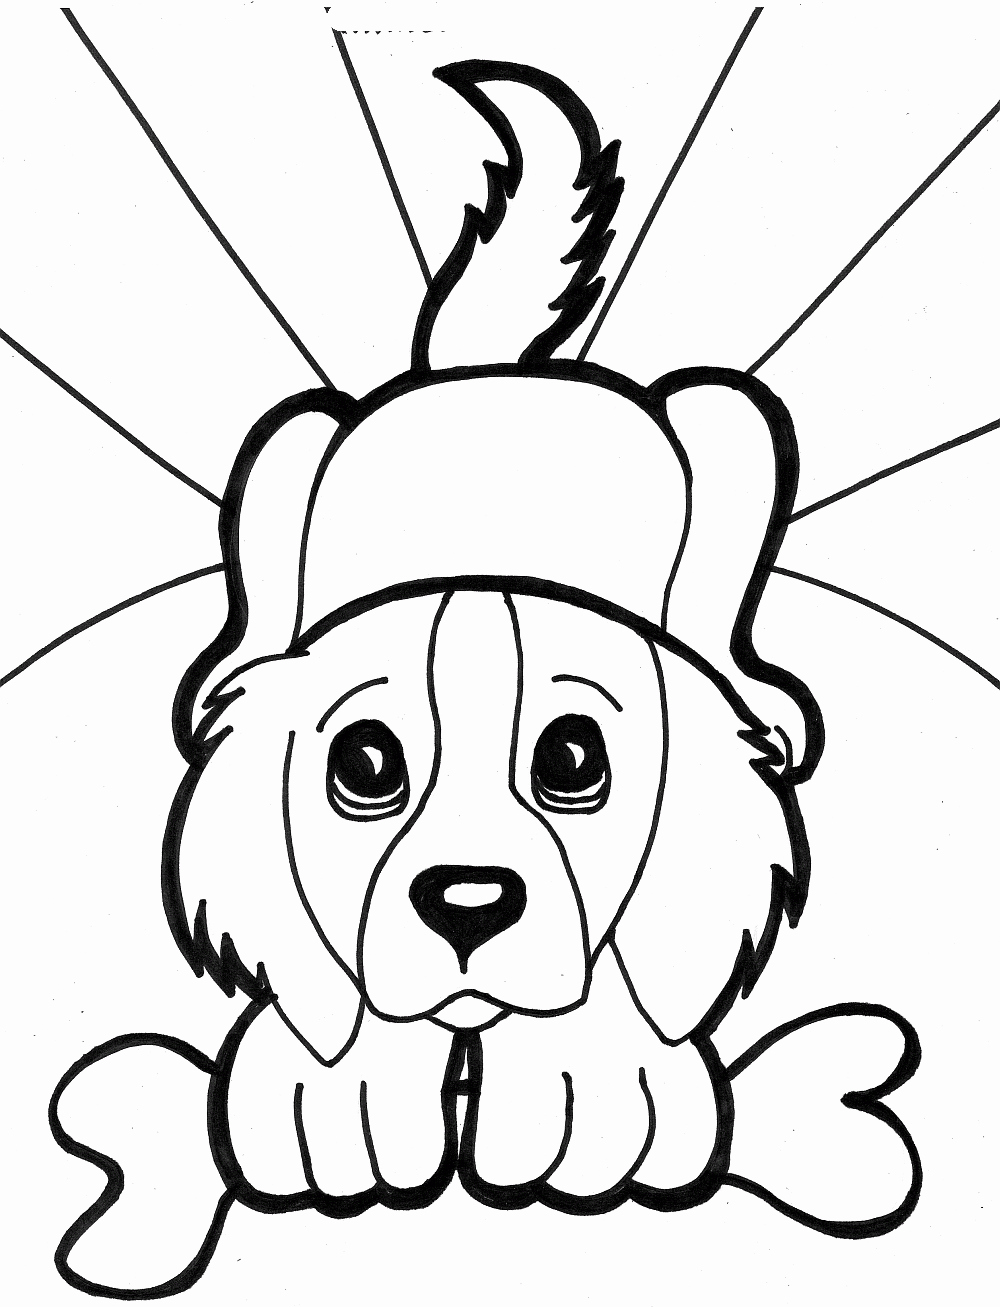 Coloring Pages Of Puppies Inspirational Printable Dogs Coloring Pages to Kids